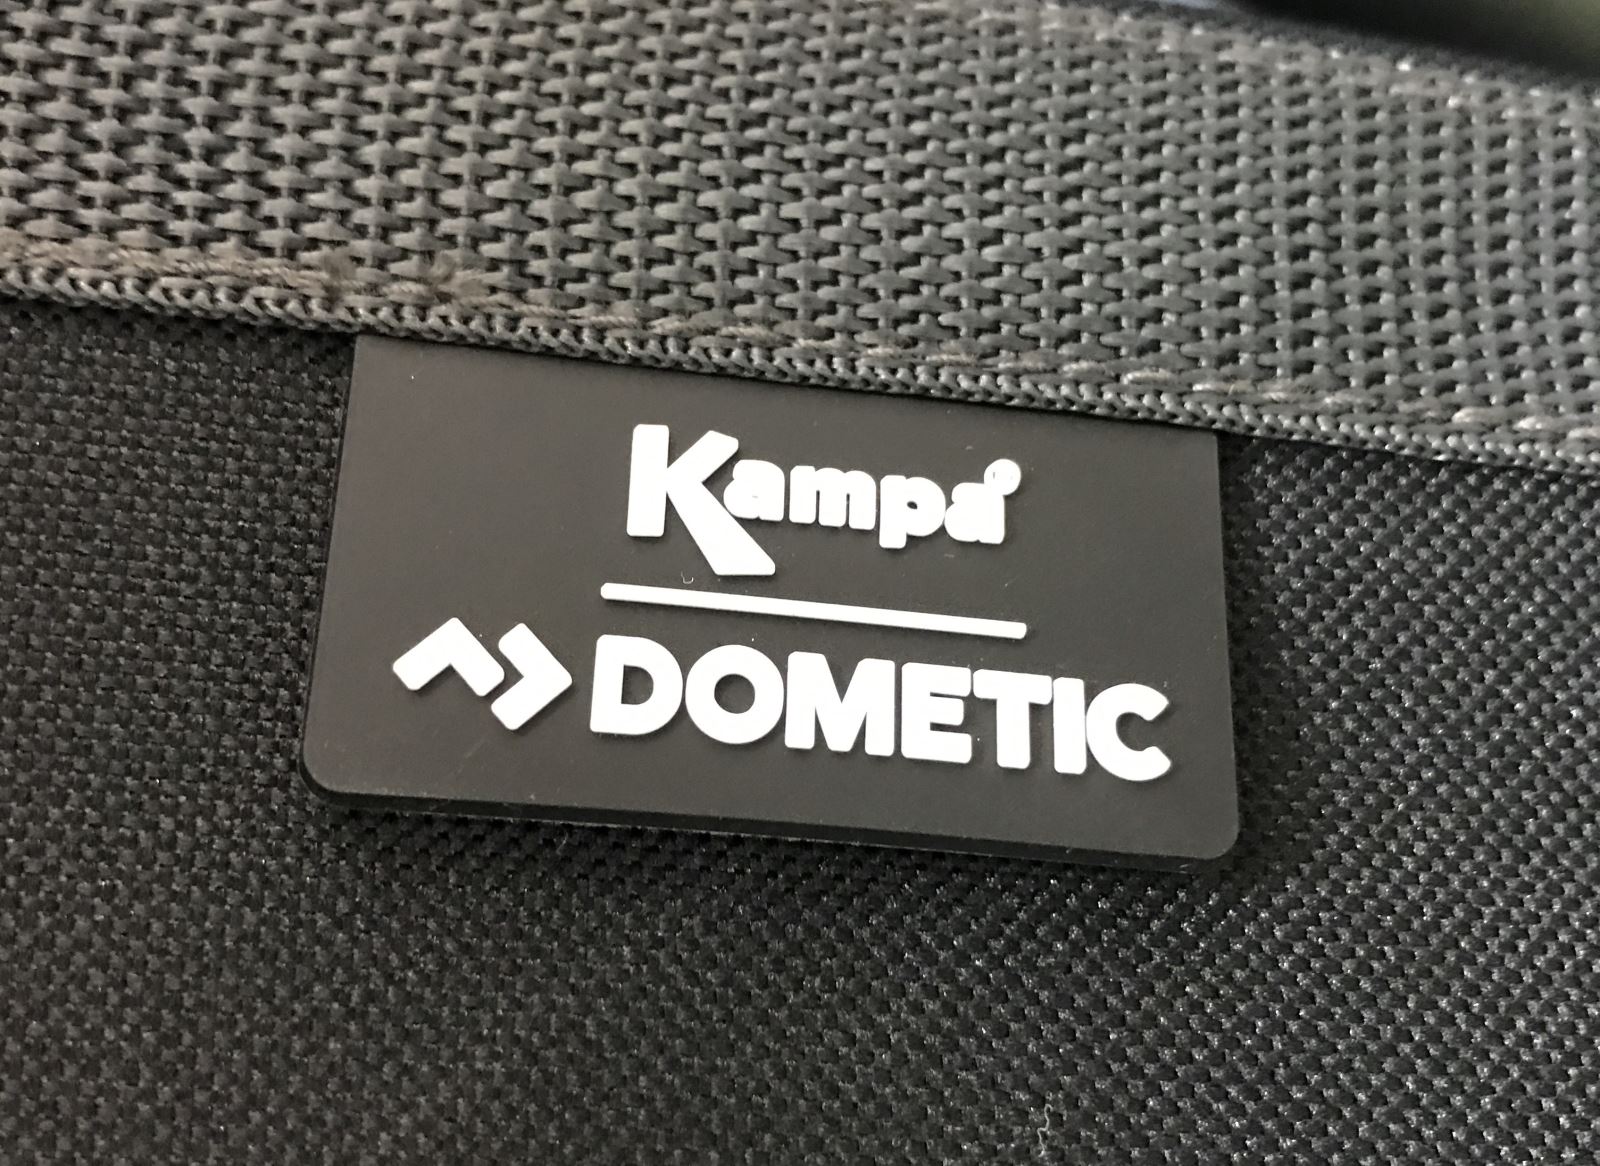 Tent and awning firm Kampa reveals new brand name and logo - Camping ...